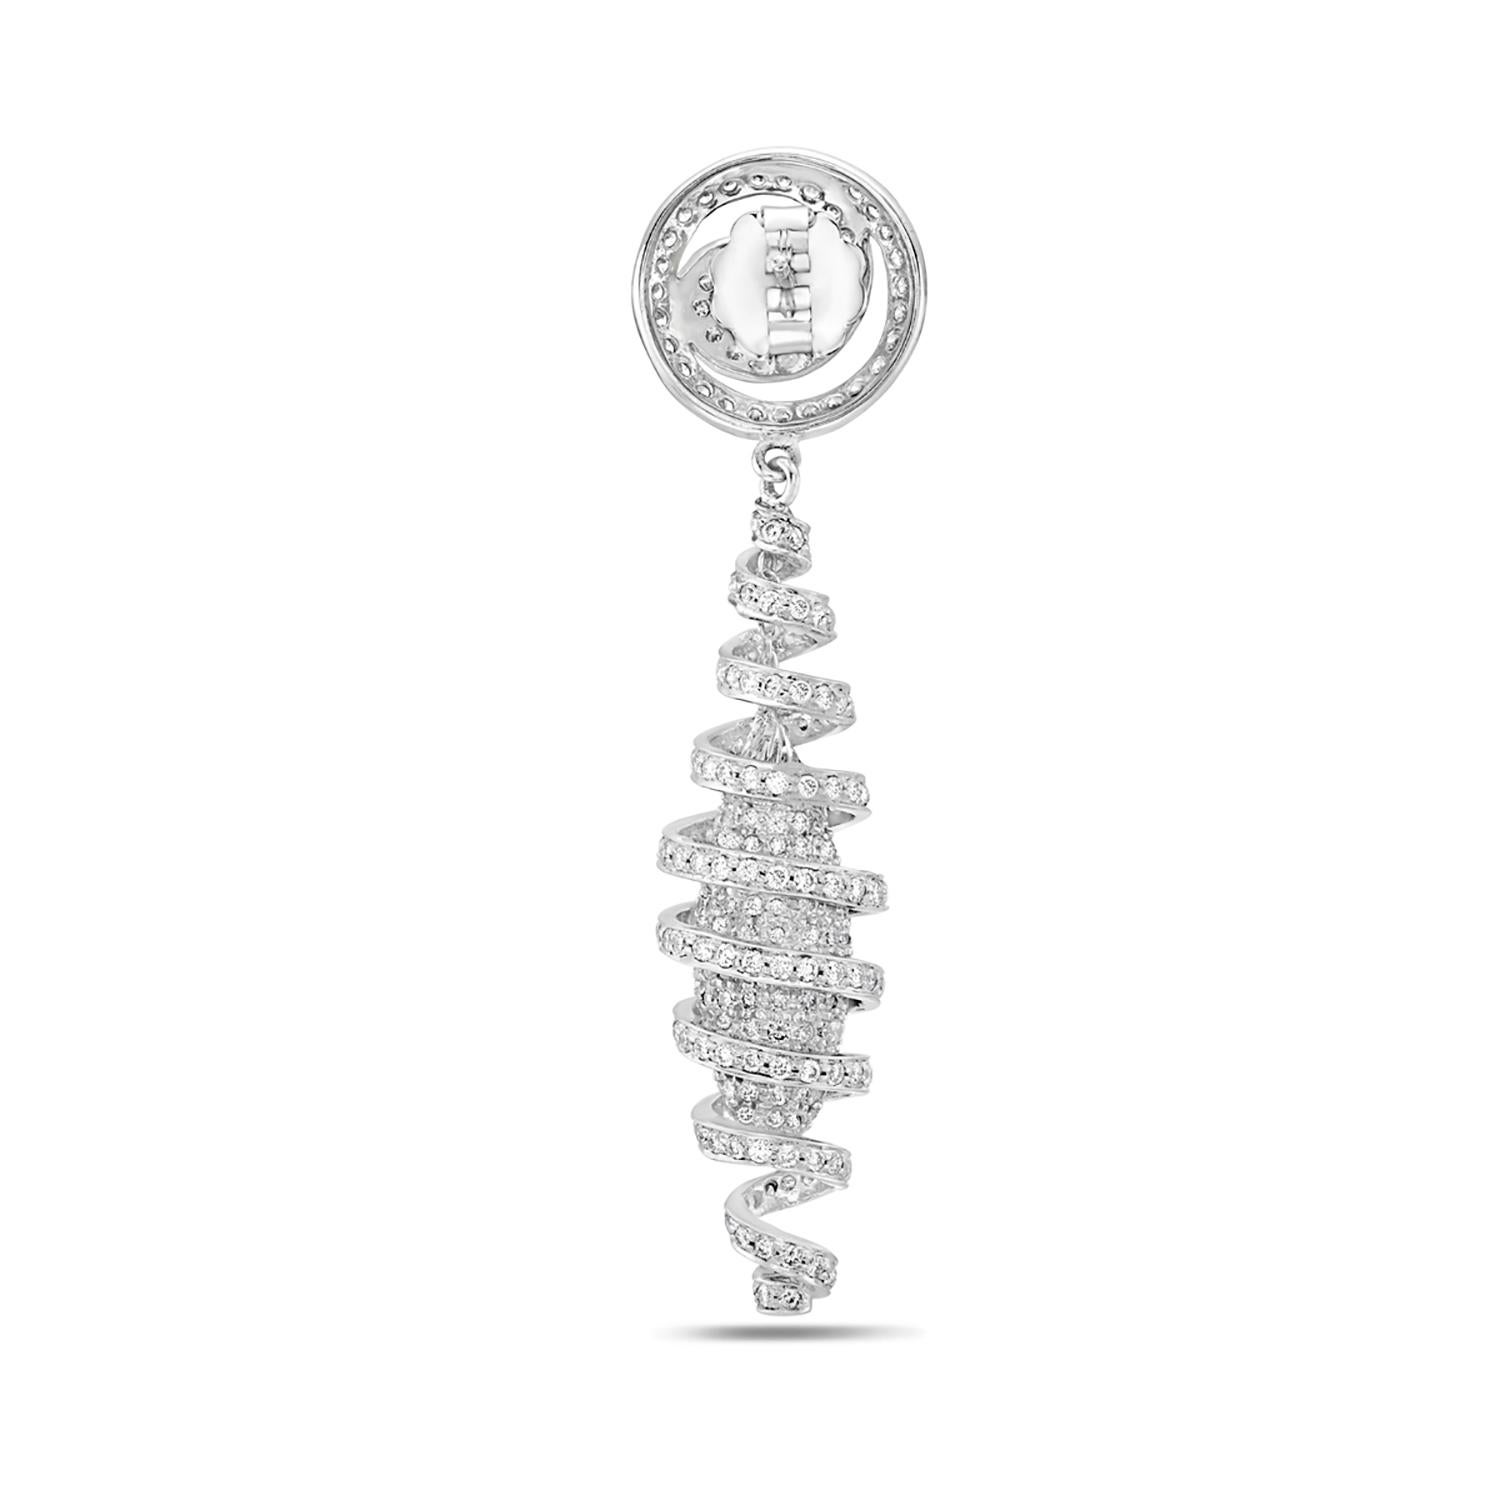 Mixed Cut Spiral Shaped Earrings with Pave Halo Diamonds Made in 18k White Gold For Sale